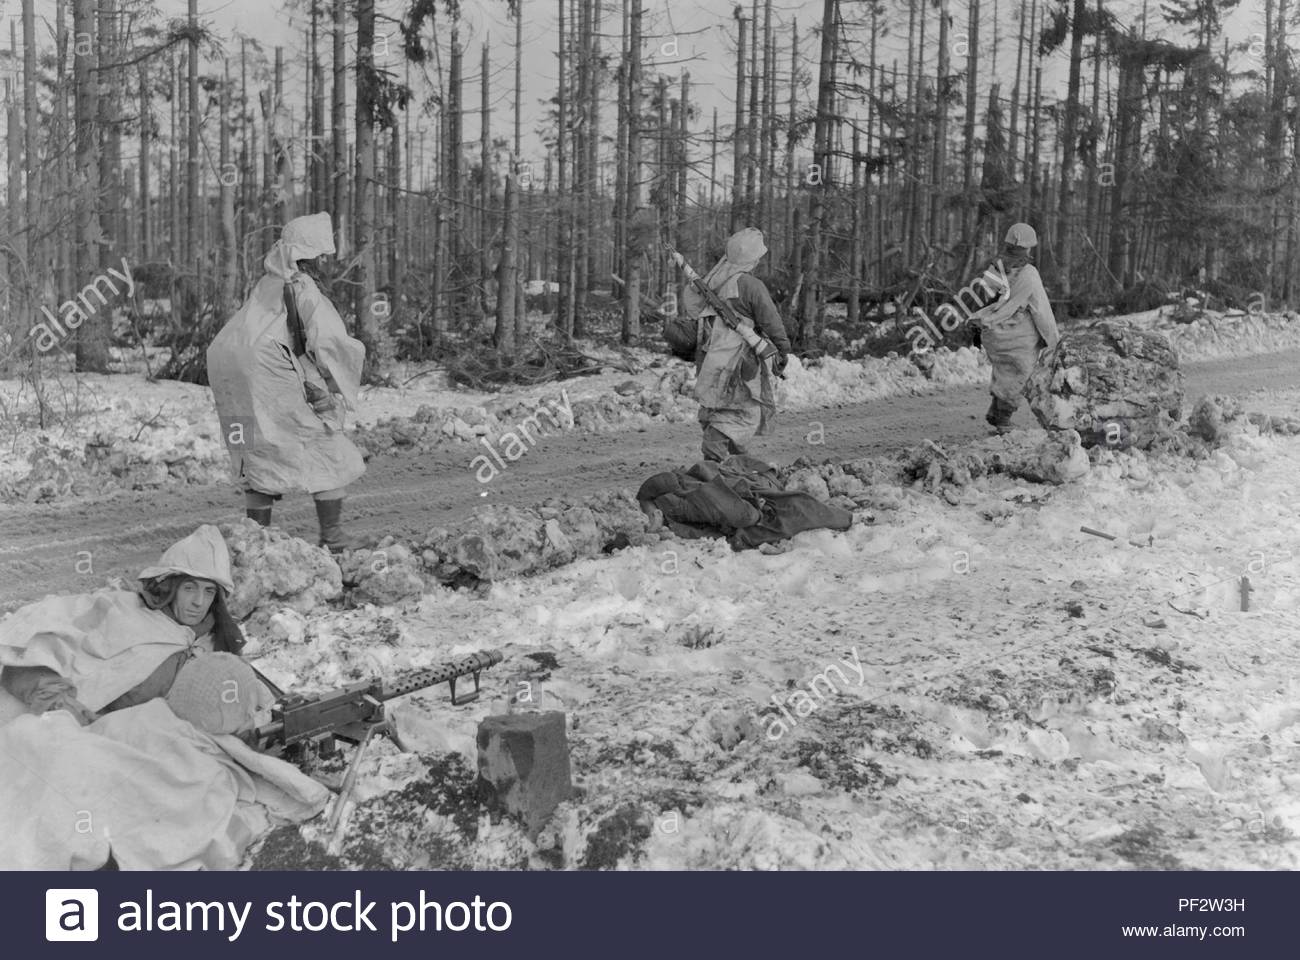 9th Infantry Division Stock Photos & 9th Infantry Division Stock Images - Alamy